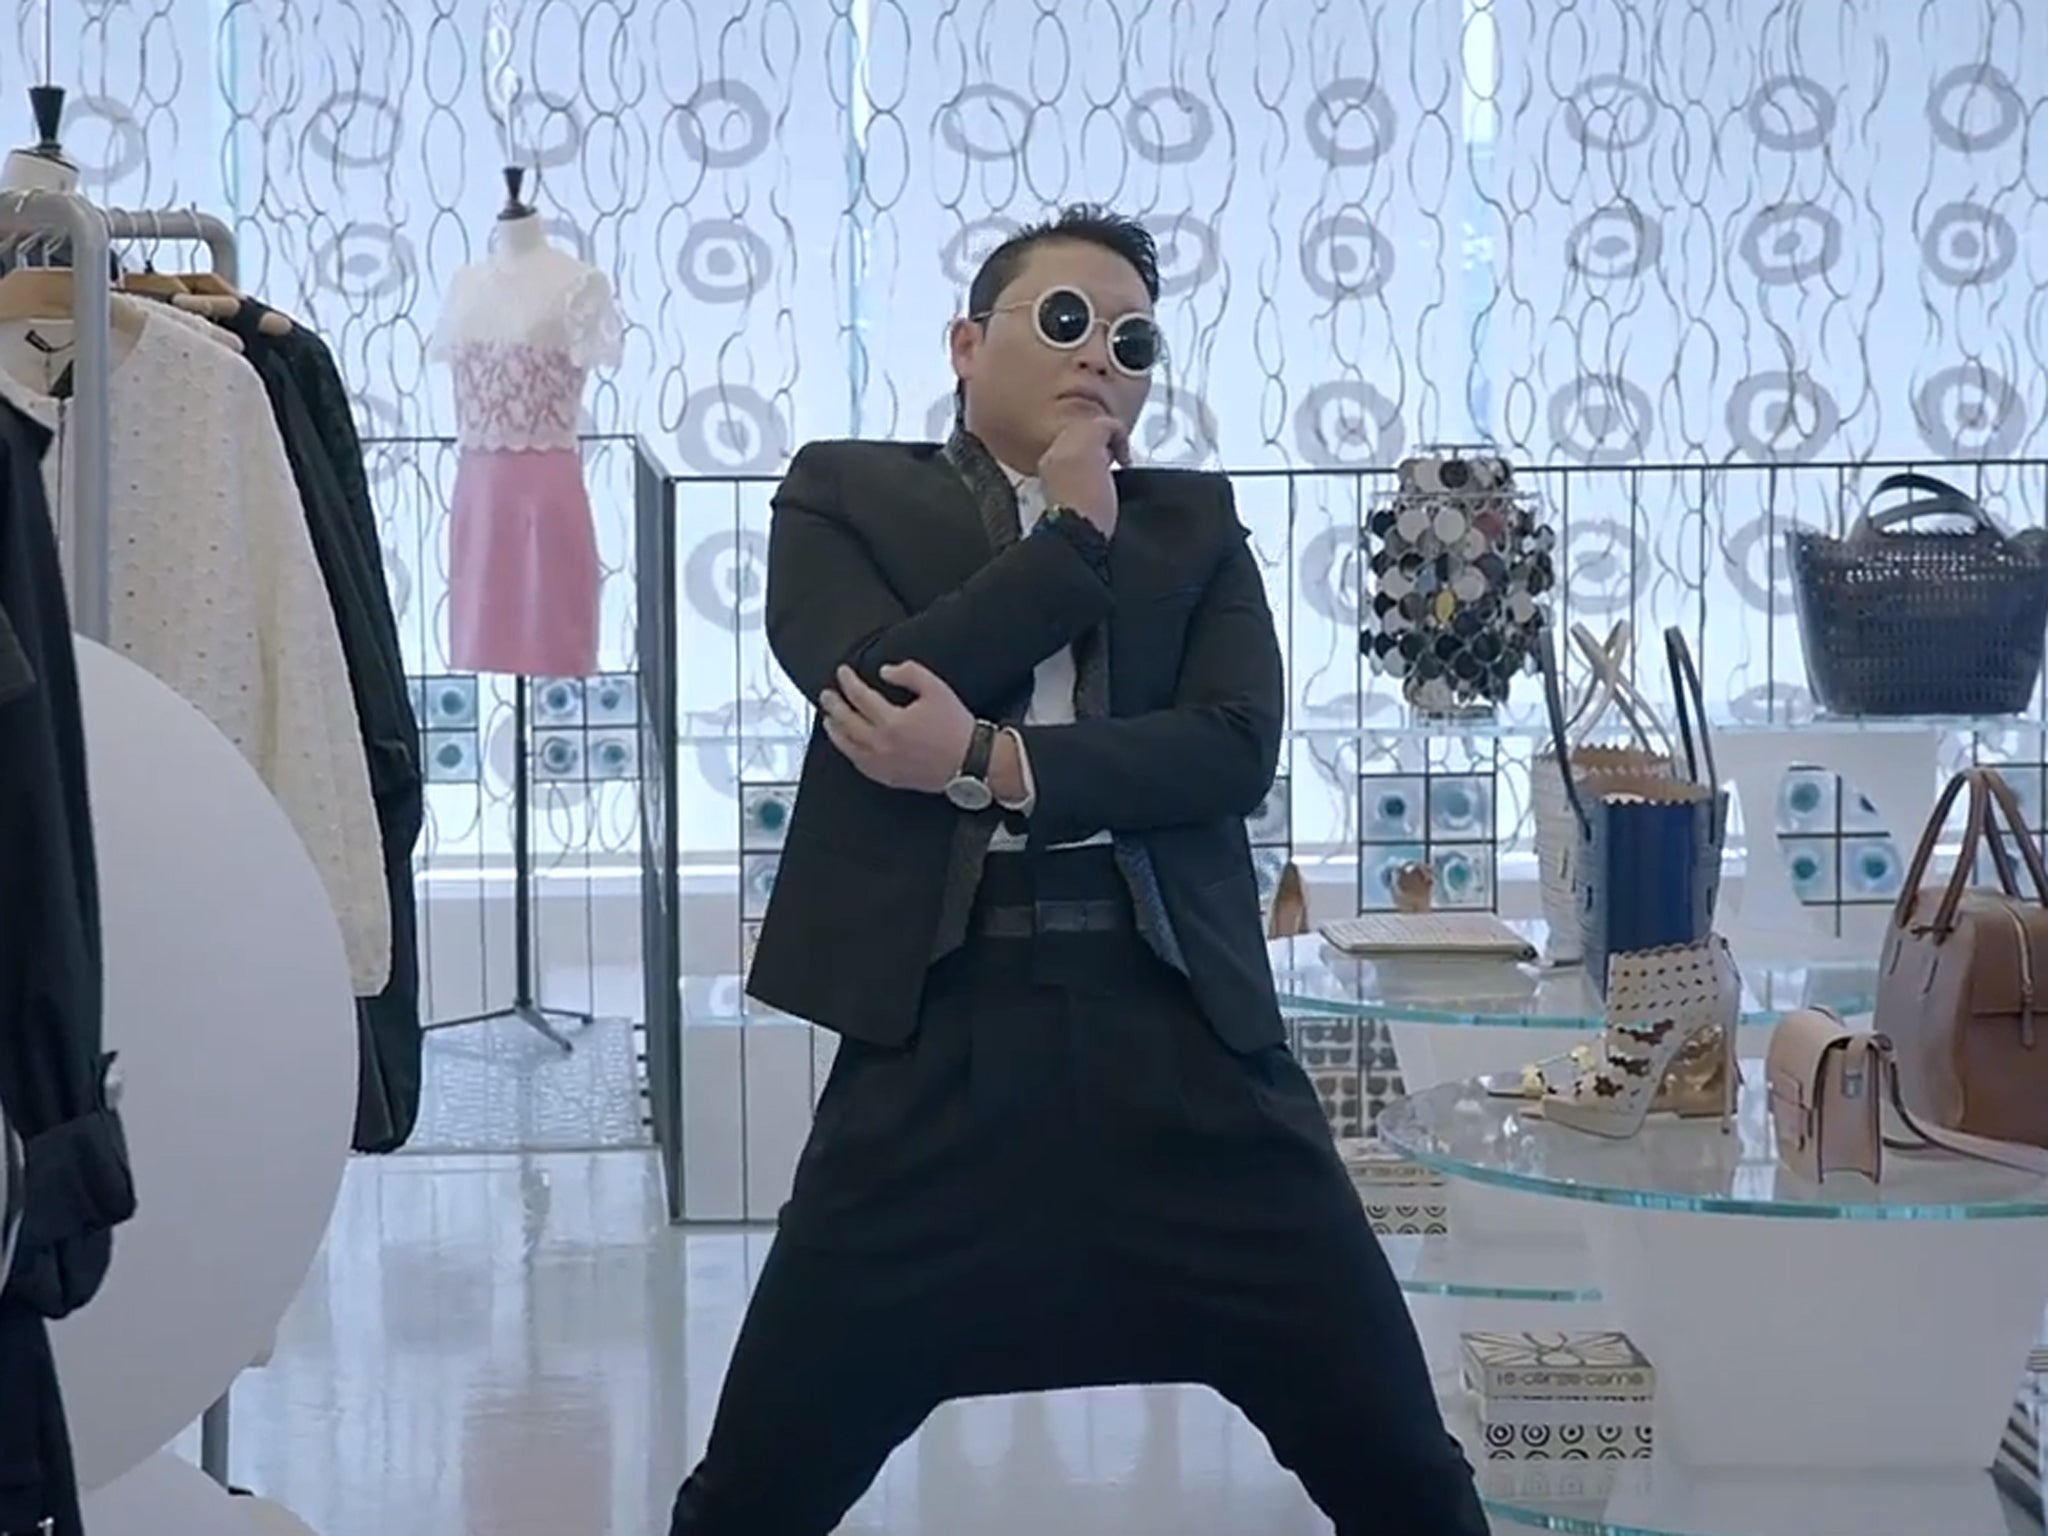 Psy rose to international fame thanks entirely to web video views